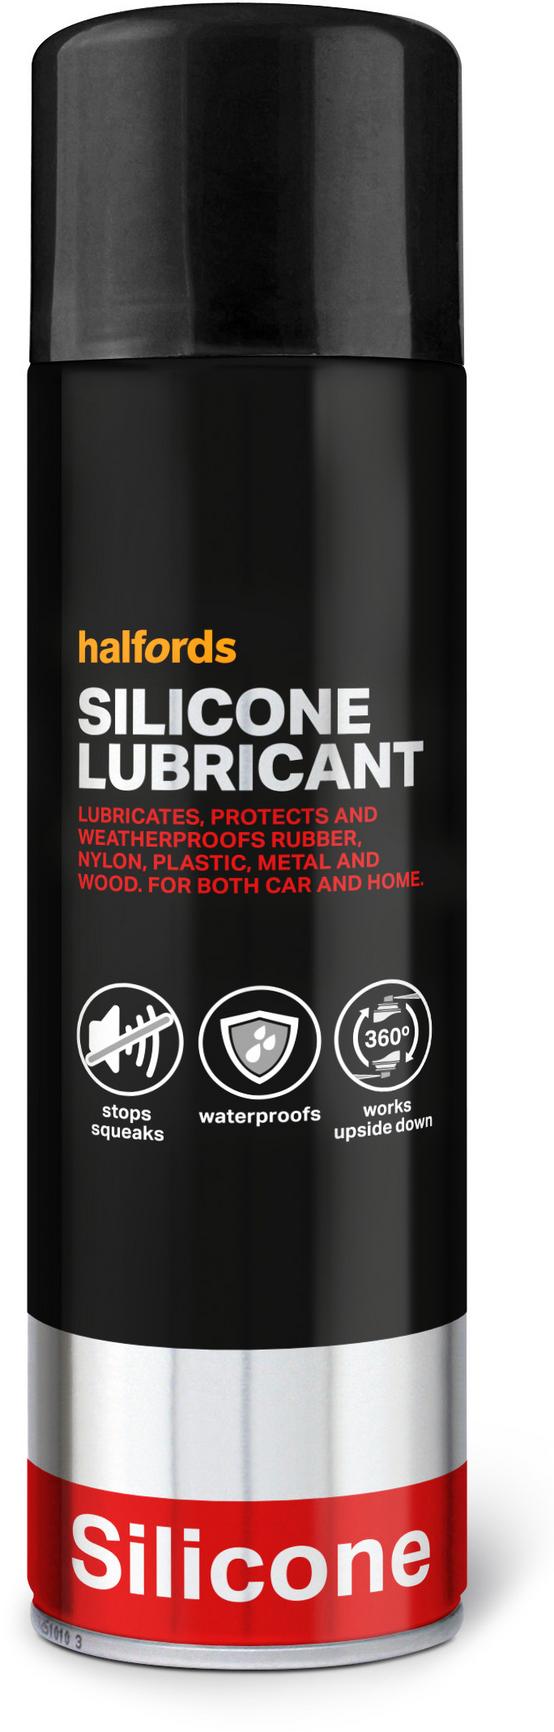 Silicone Spray for Glass